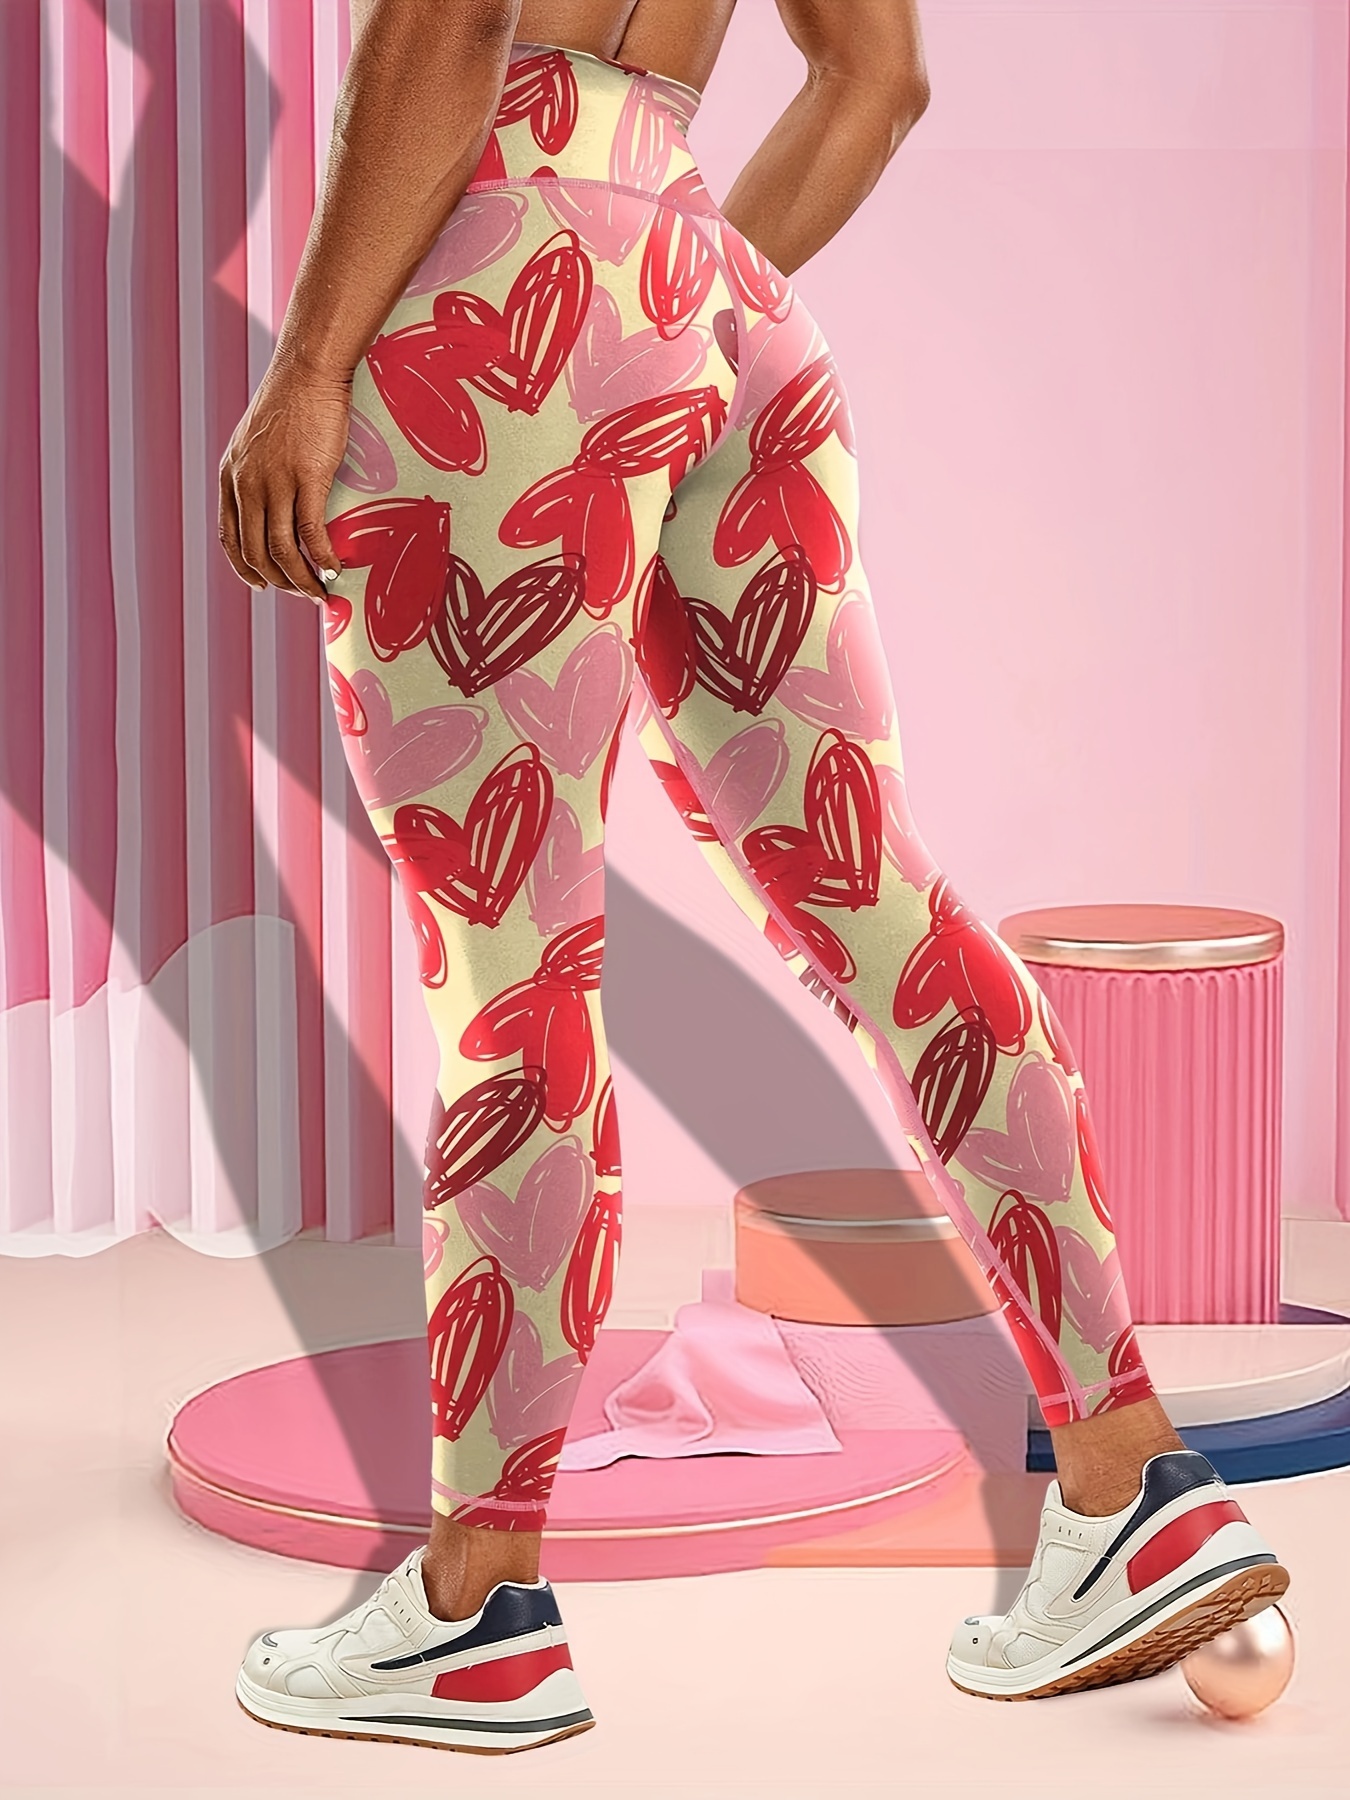 twifer valentines day gift sets women's legging womens leggings valentine  day cute print casual comfortable home leggings boot pants